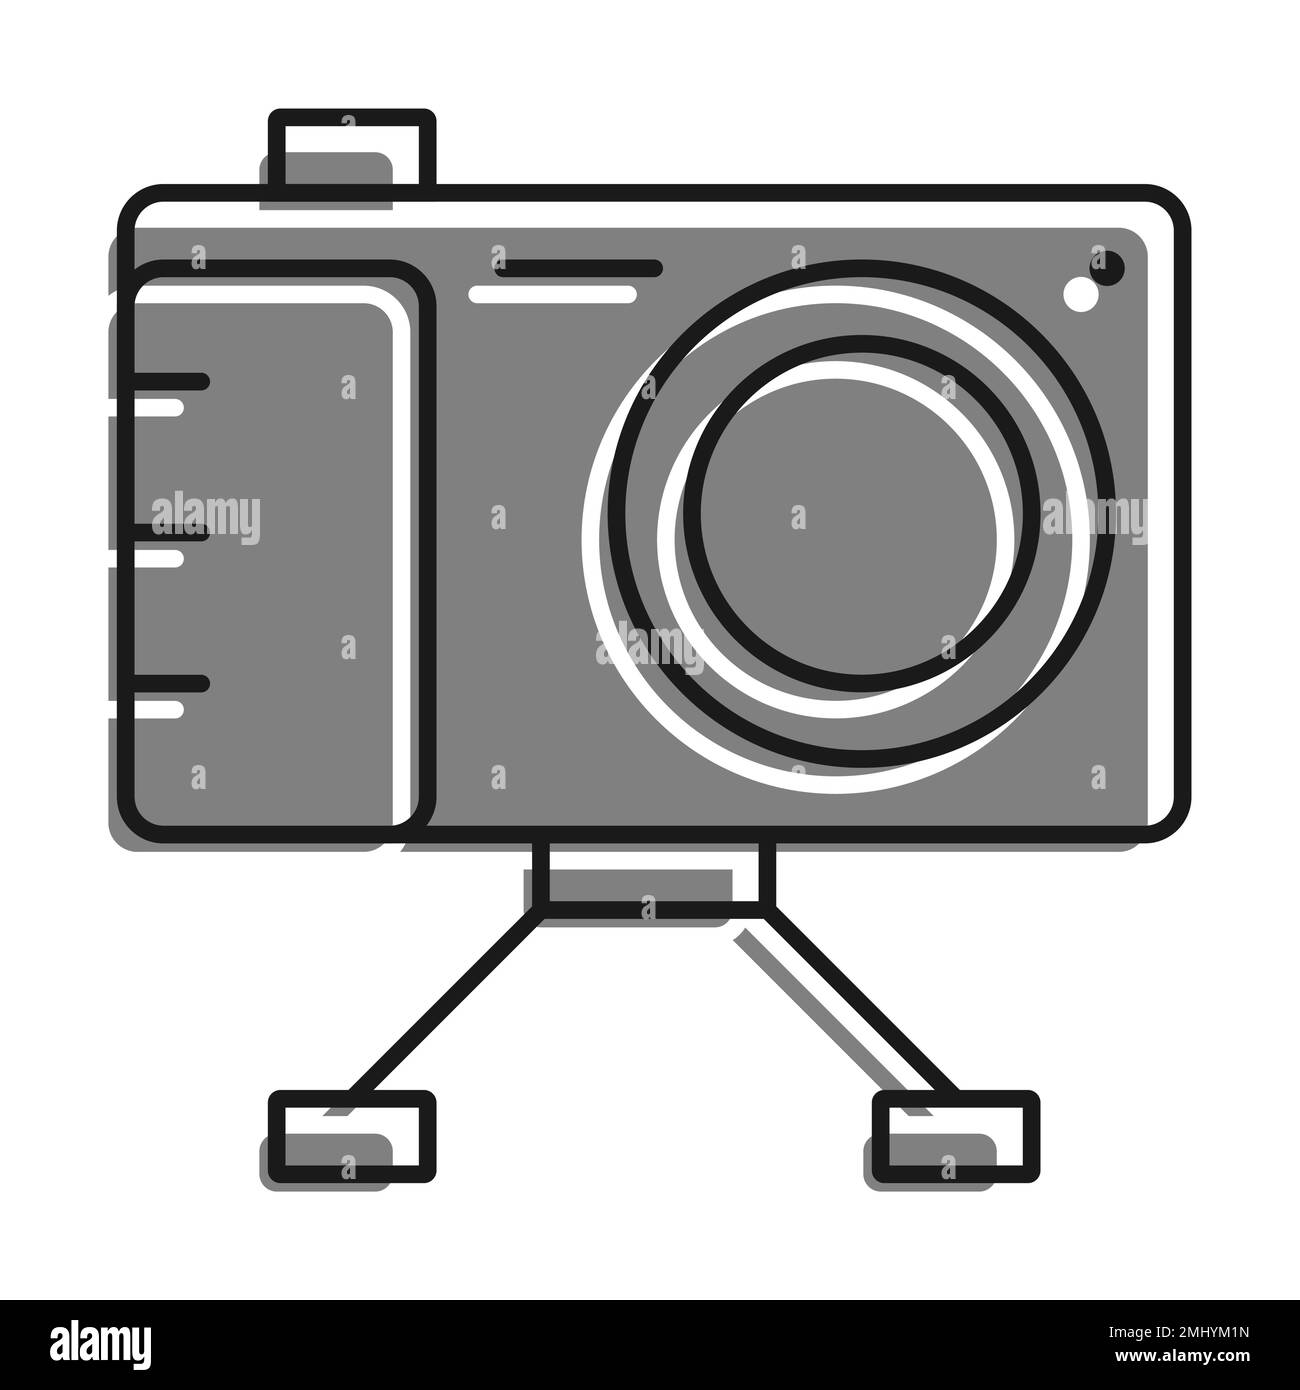 Linear filled with gray color icon. Camera On Stand, Equipment For Photography And Selfie. World Photography Day August 19th. Simple black and white v Stock Vector